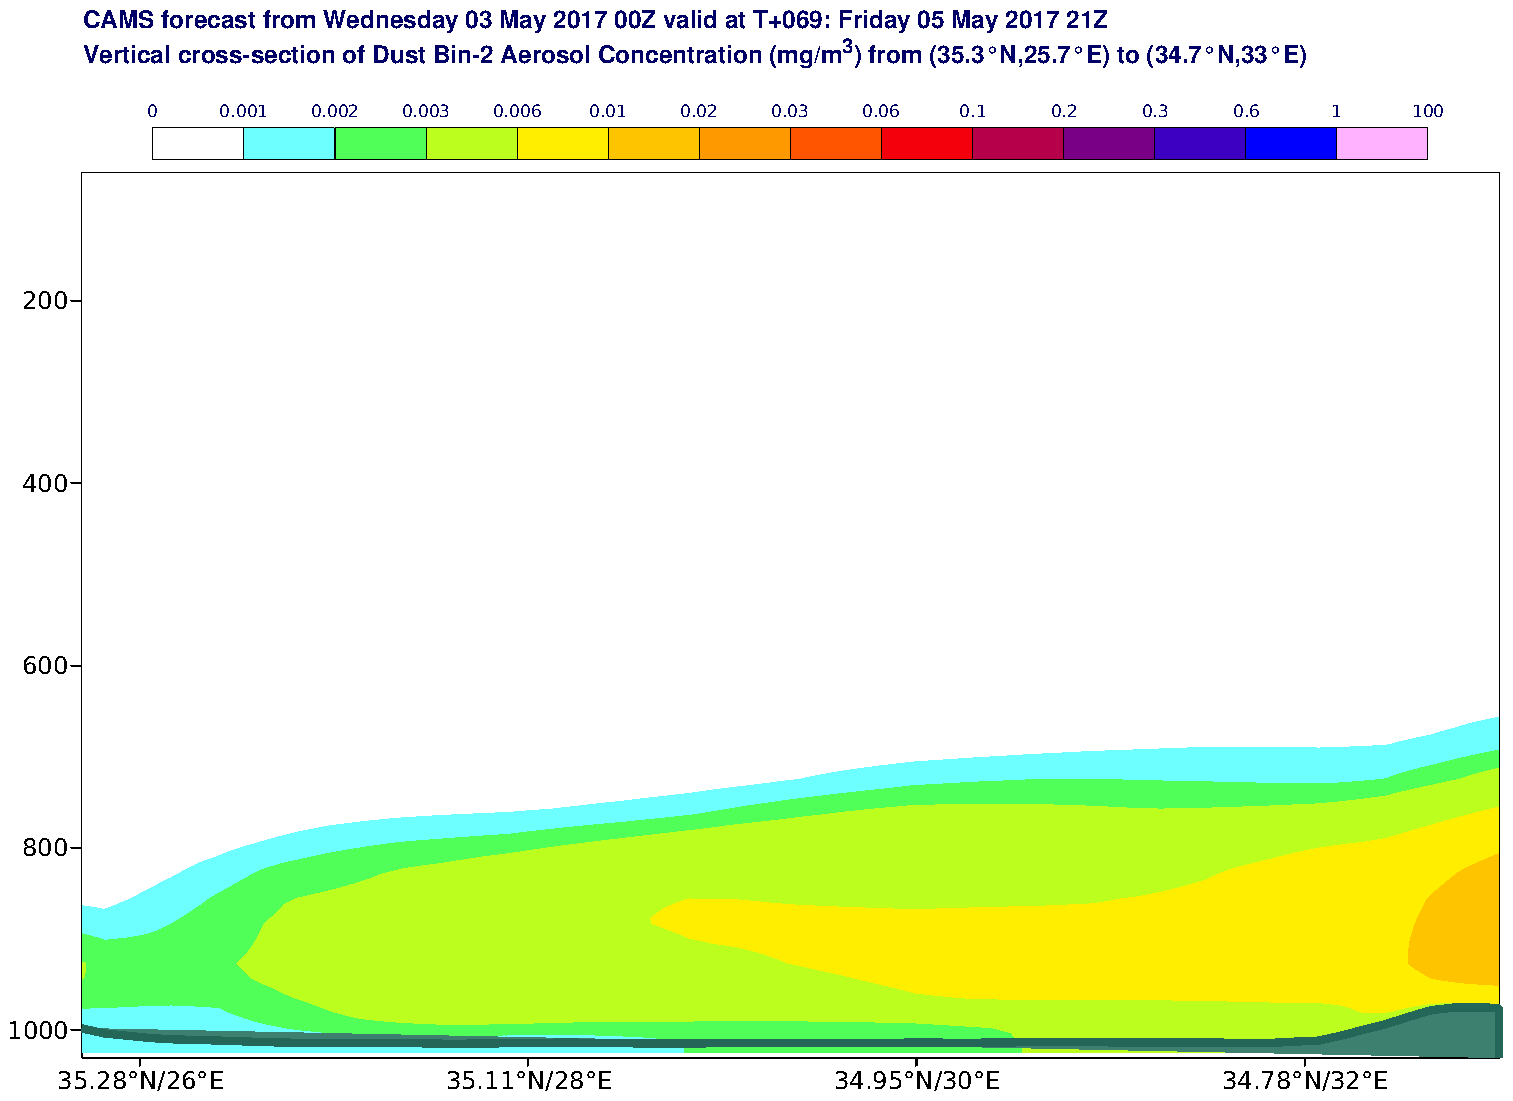 Vertical cross-section of Dust Bin-2 Aerosol Concentration (mg/m3) valid at T69 - 2017-05-05 21:00